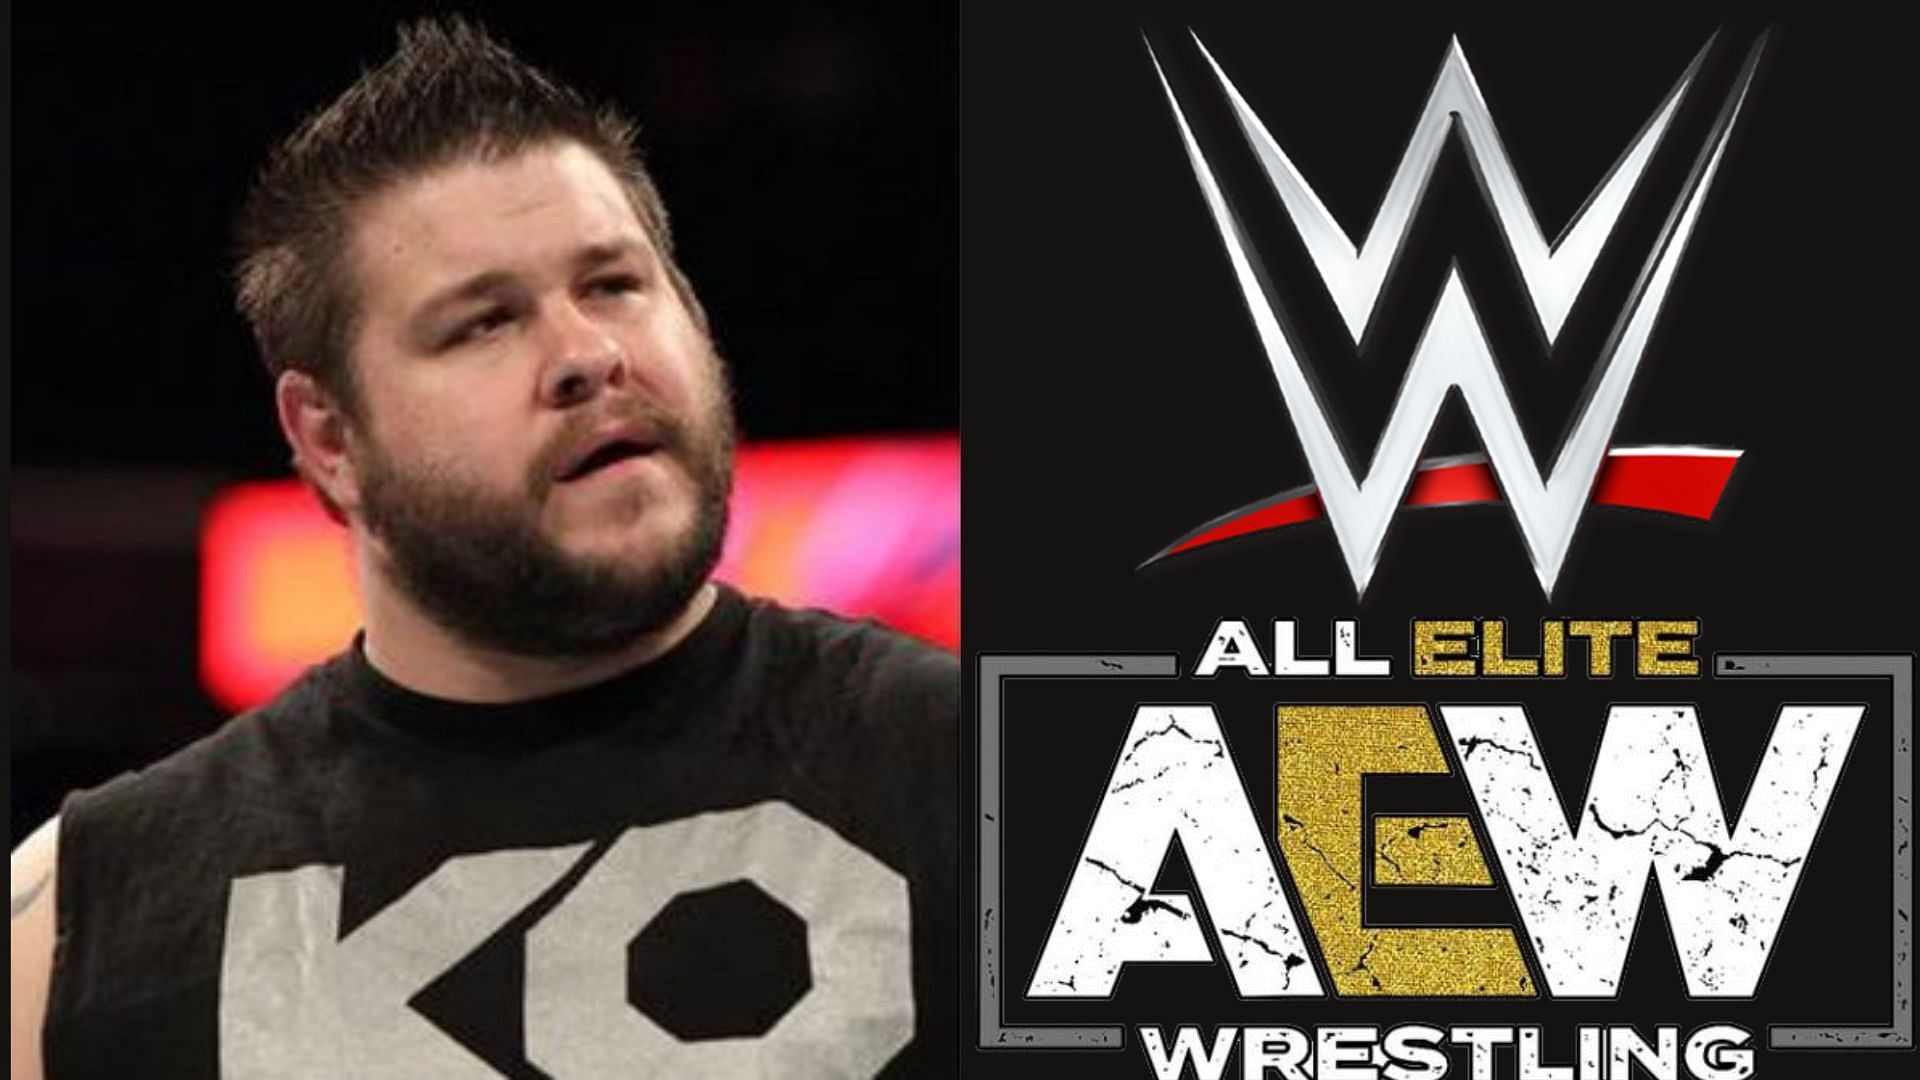 Kevin Owens is a former world champion